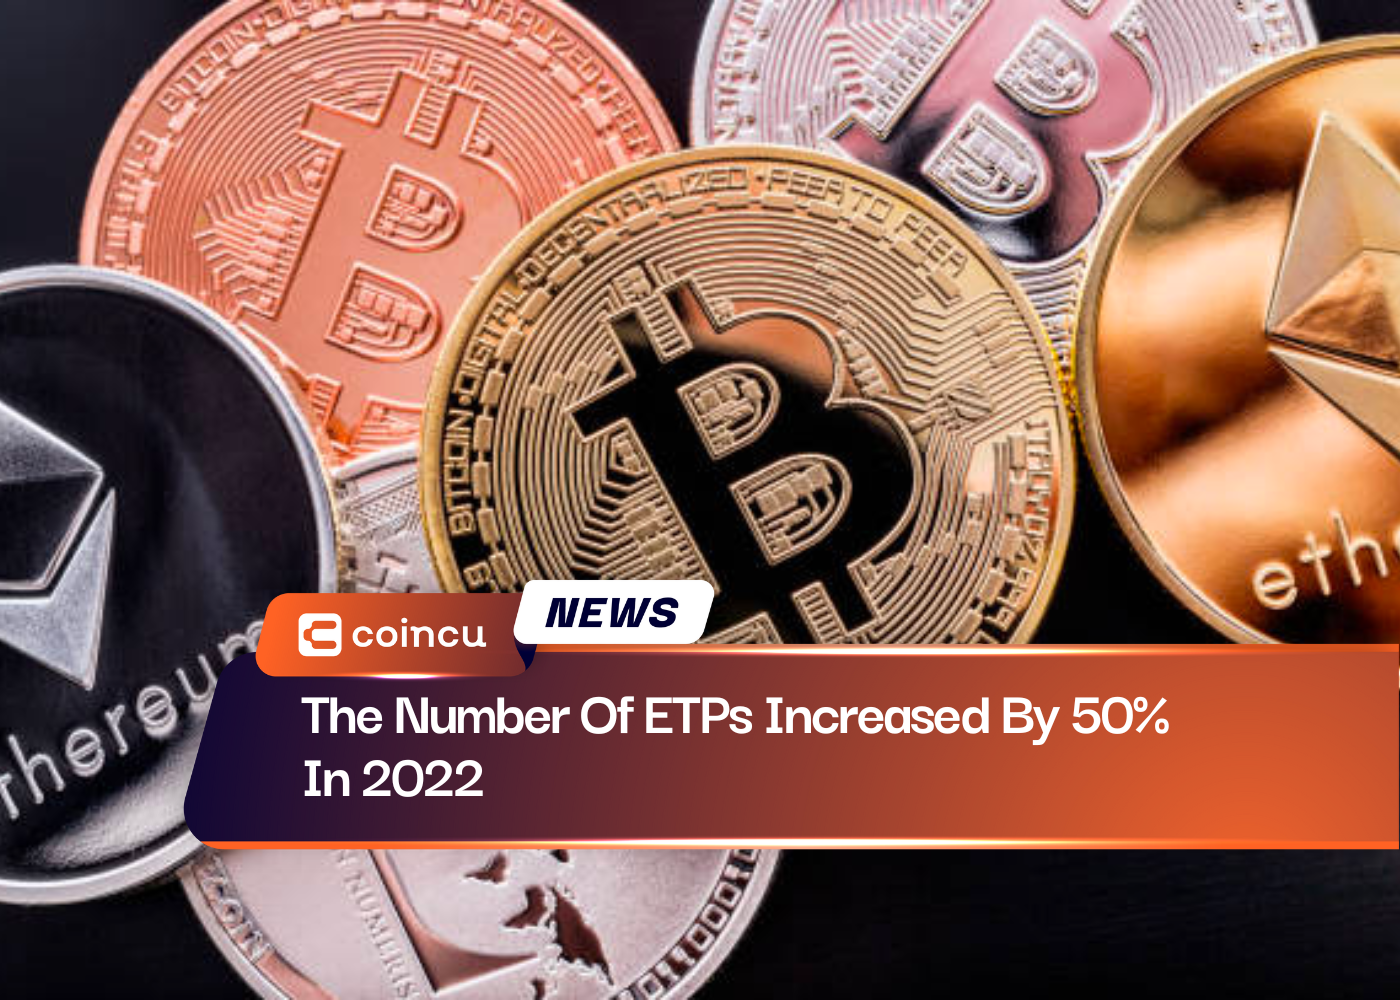 The Number Of ETPs Increased By 50% In 2022